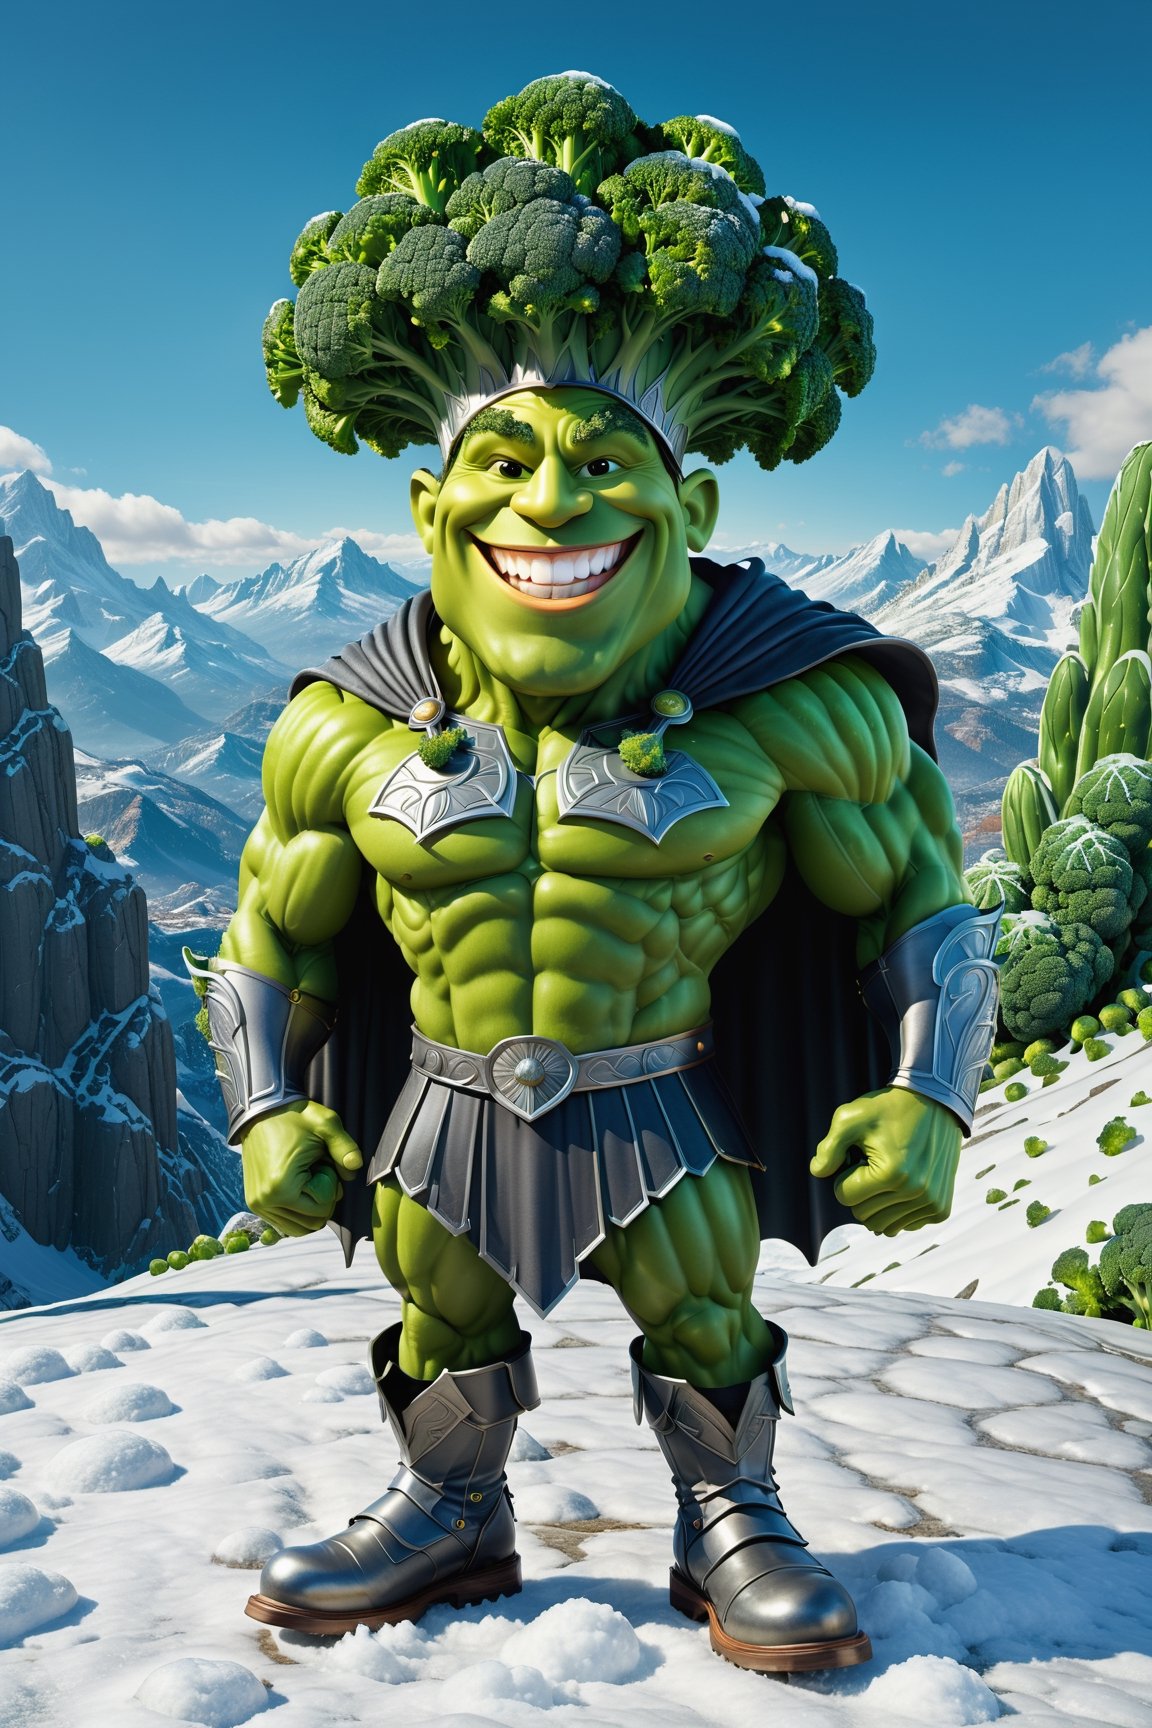 High definition photorealistic render of an incredible and mysterious character of a head mr brocoli vegetable warrior, with muscles and a big smile, with boots and capes, in a mountains snow, with luxurious details in marble and metal and details in parametric architecture and art deco, the vegetable It must be the head of the character full body pose themed brocoli  themed costumes, magical phantasy